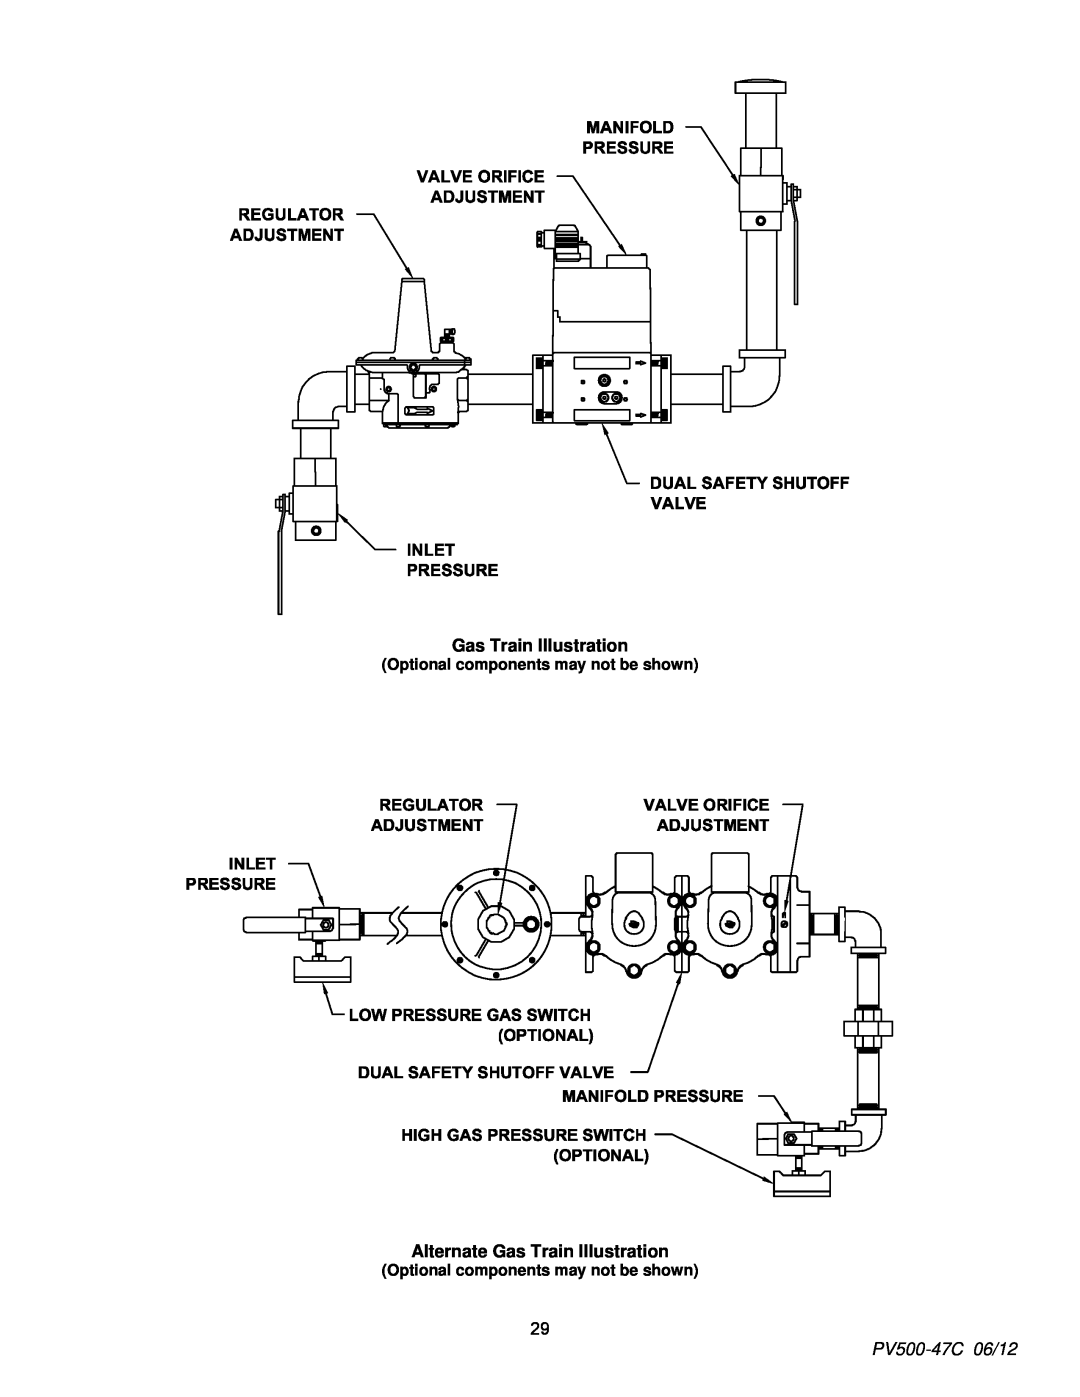 PVI Industries manual Alternate Gas Train Illustration, PV500-47C06/12, Optional components may not be shown 